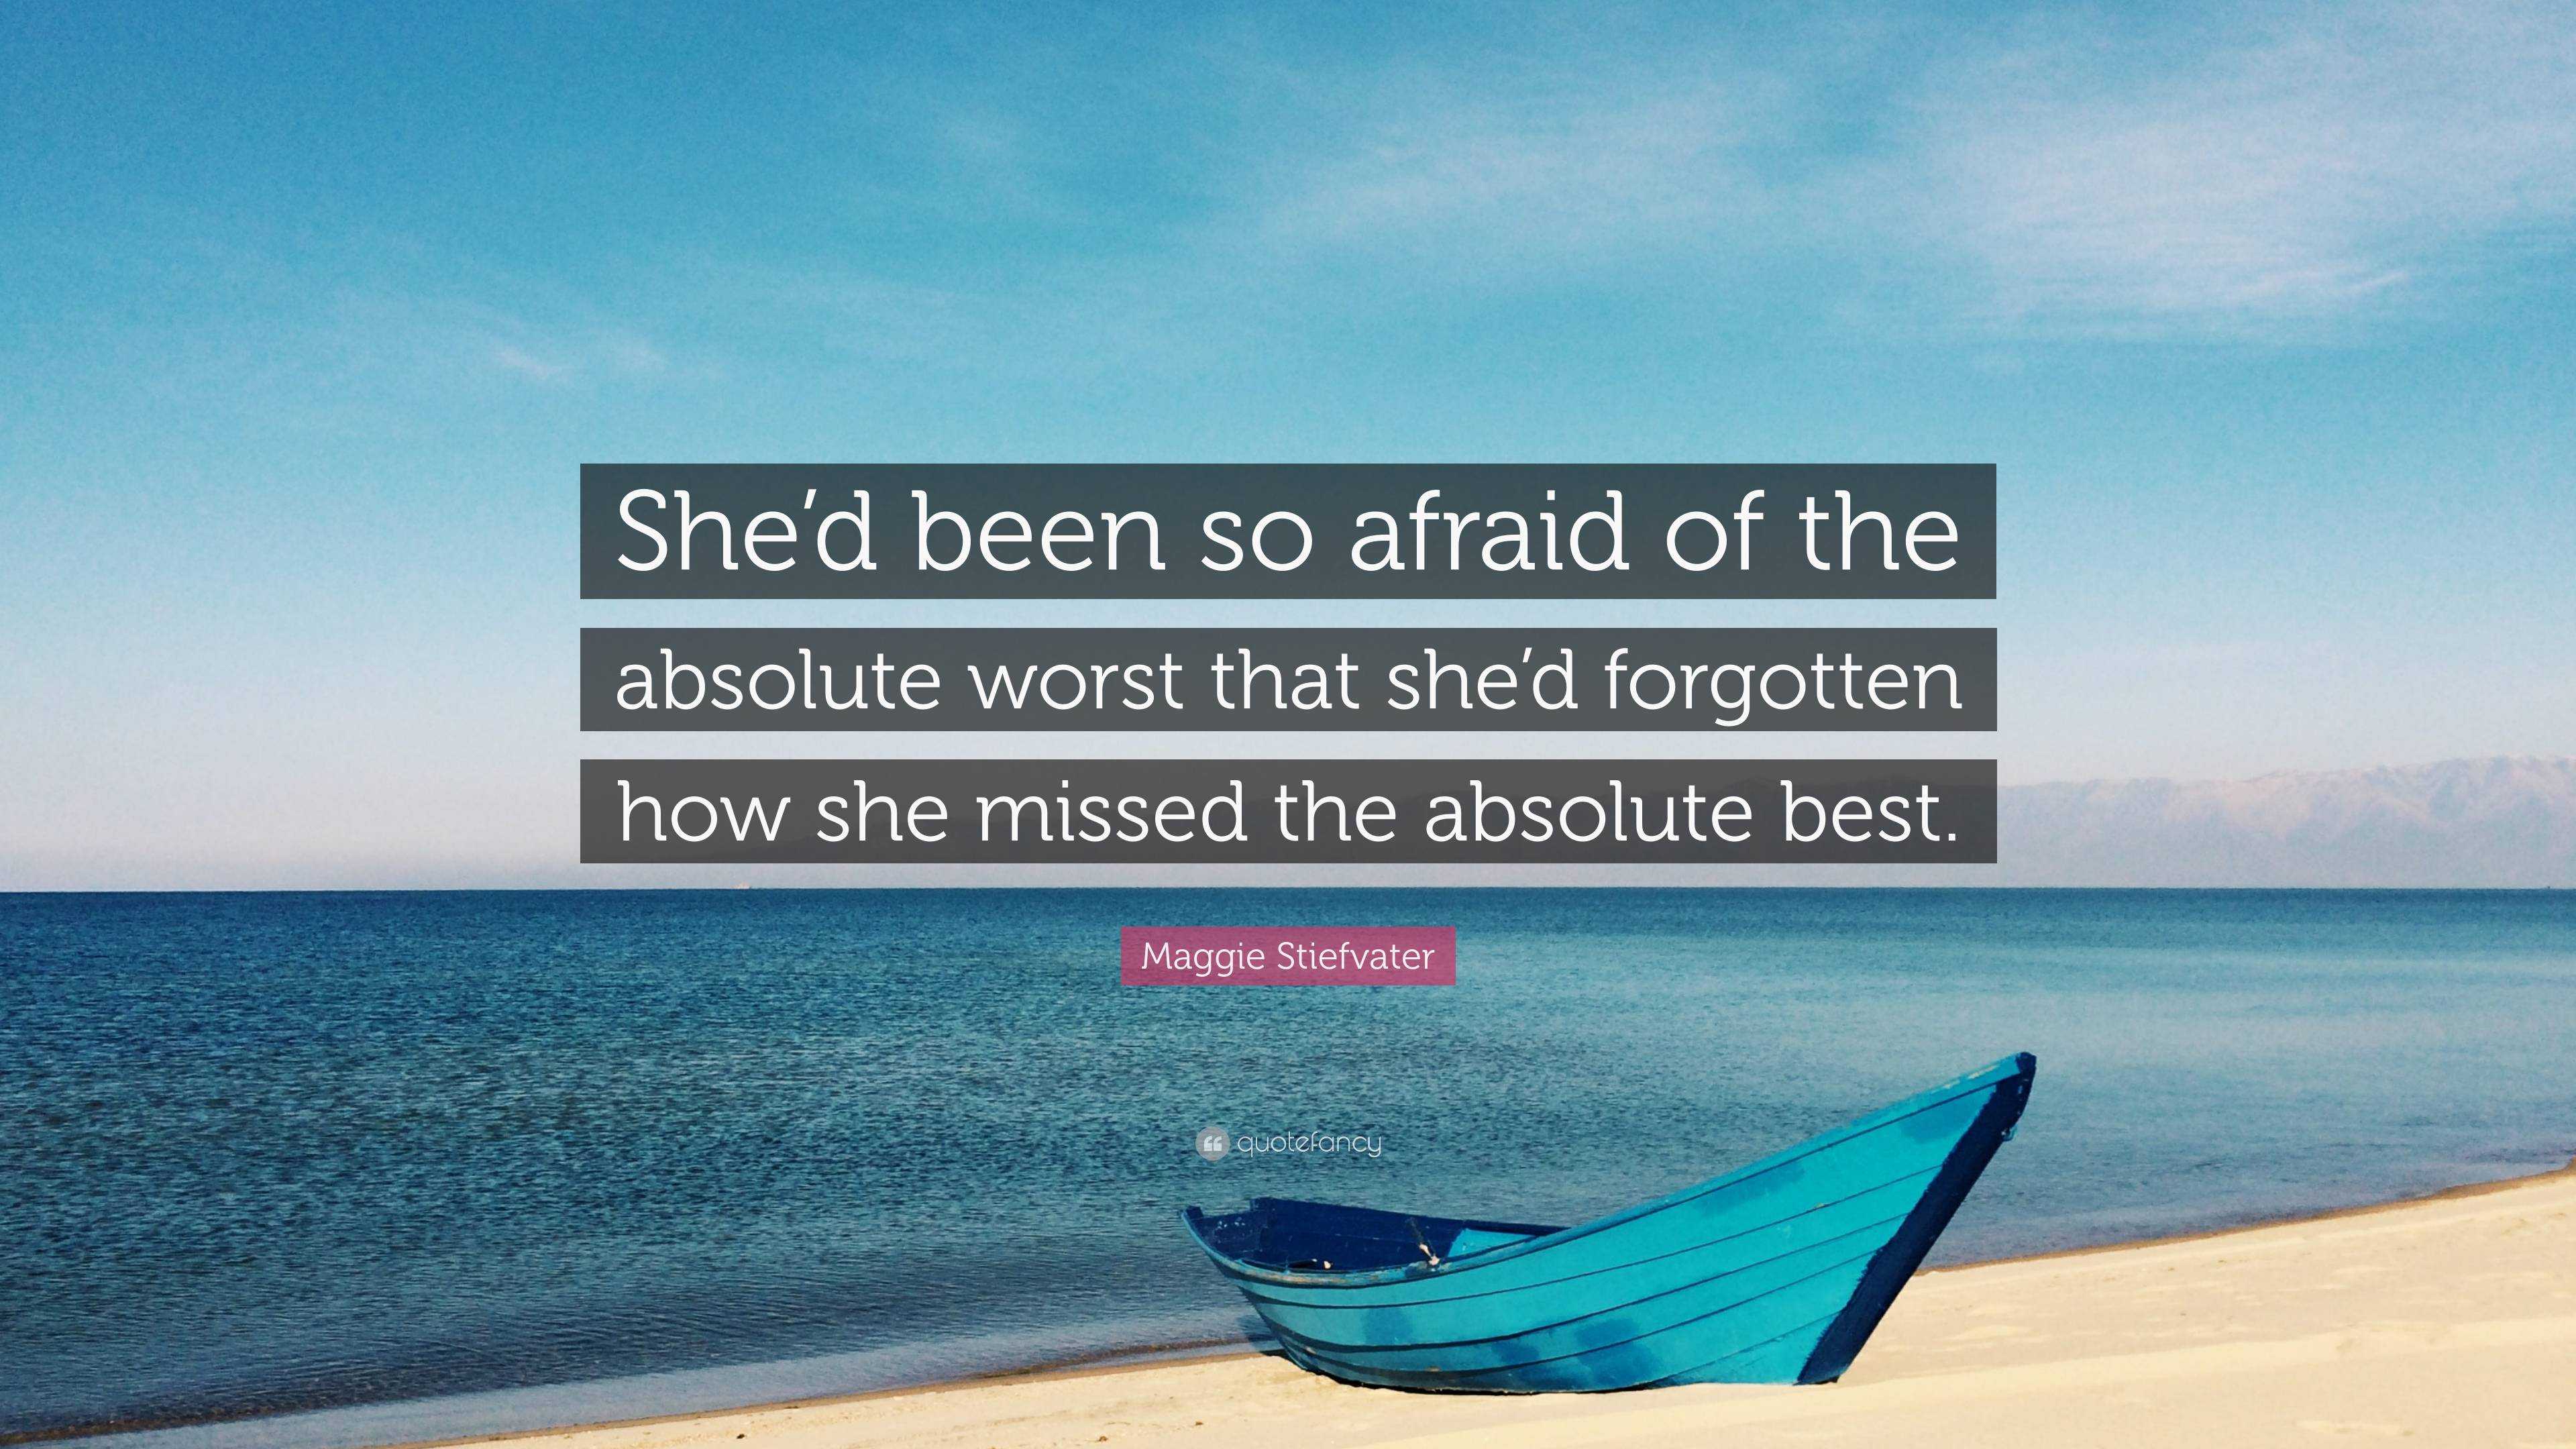 Maggie Stiefvater Quote “shed Been So Afraid Of The Absolute Worst That Shed Forgotten How